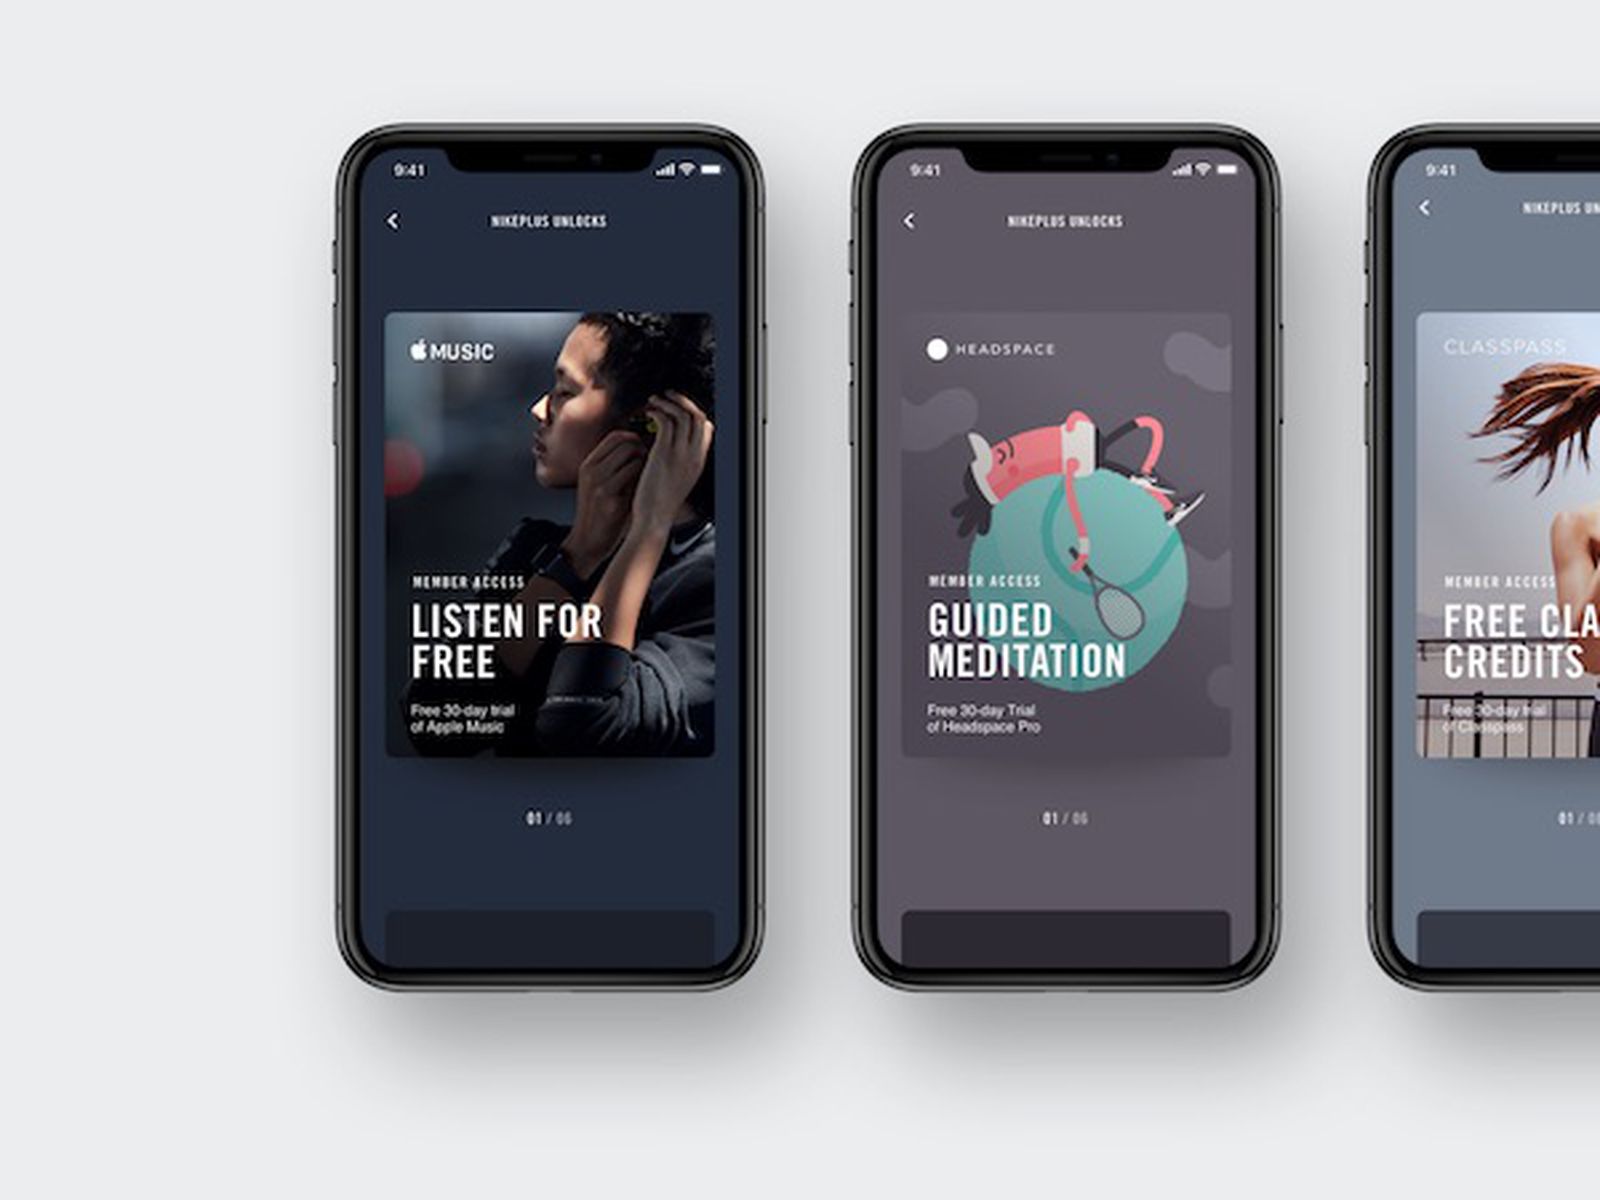 Can Now Earn Apple Music Subscriptions and Exclusive Playlists -